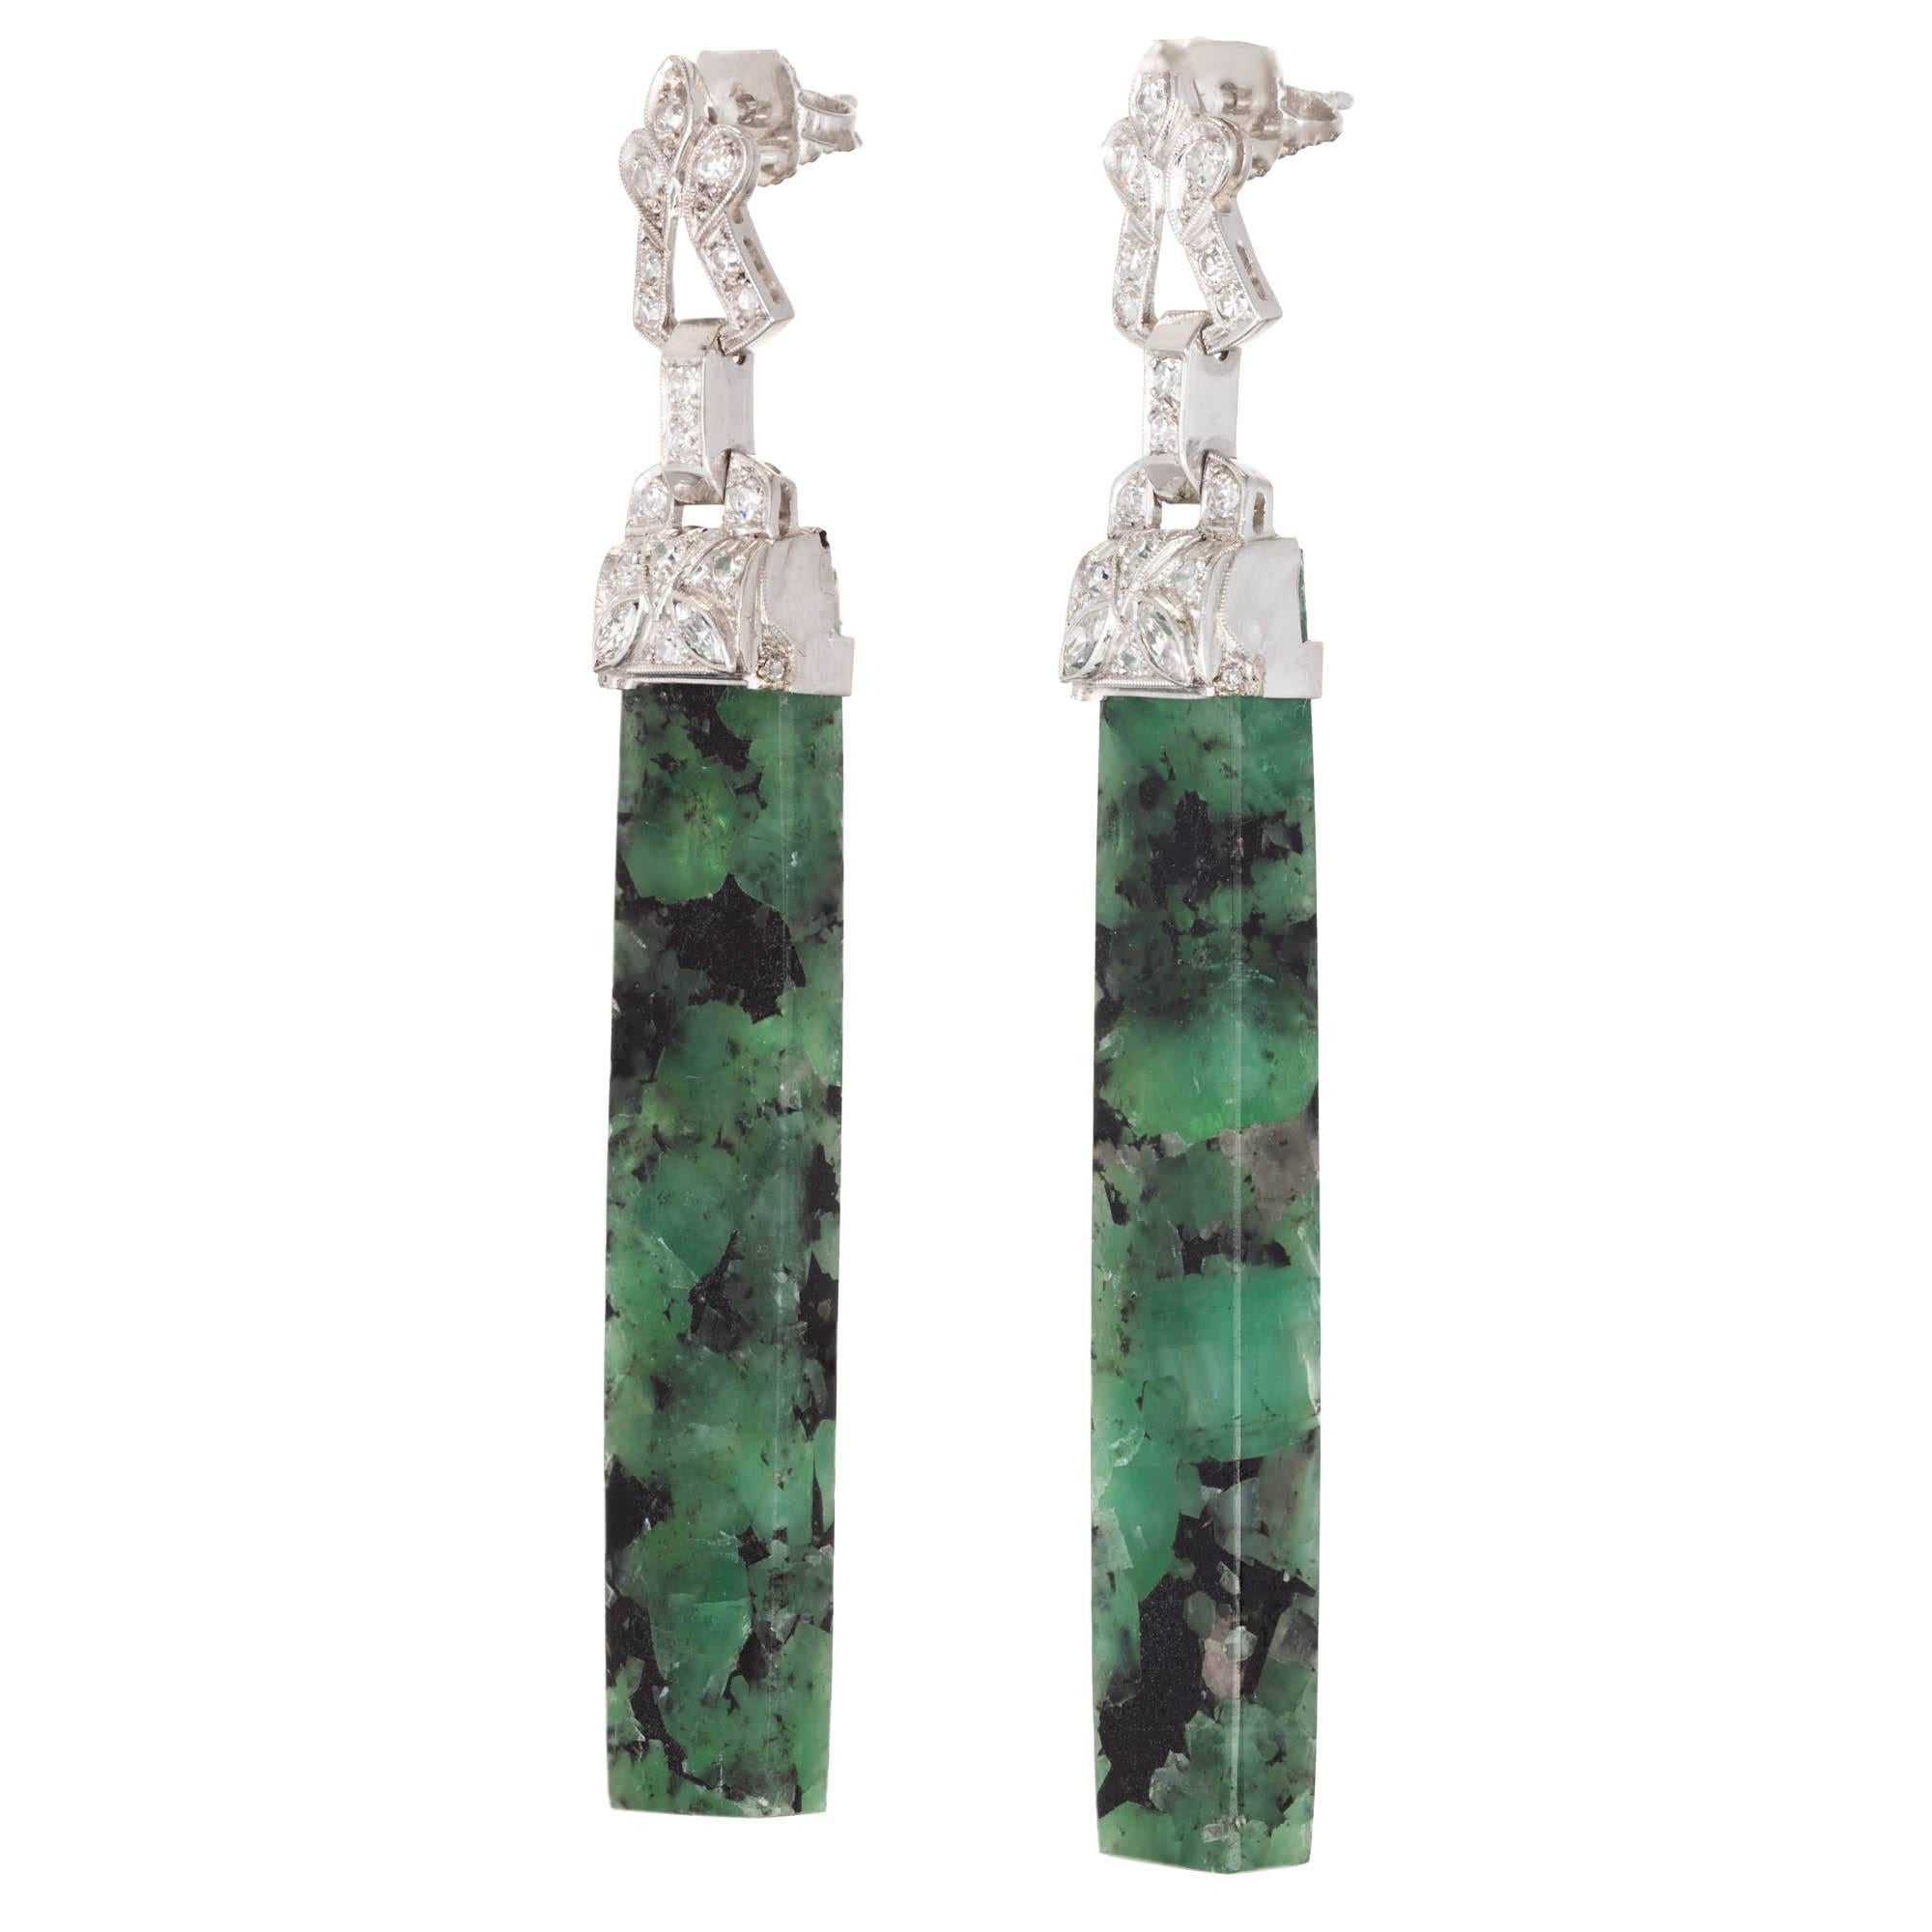 Emerald and diamond dangle drop earrings. Hinged Platinum tops set with single and Marquise cut diamonds.  Two perfectly marched natural totally untreated long Emerald rectangle slices with mottled green and black color and true translucent